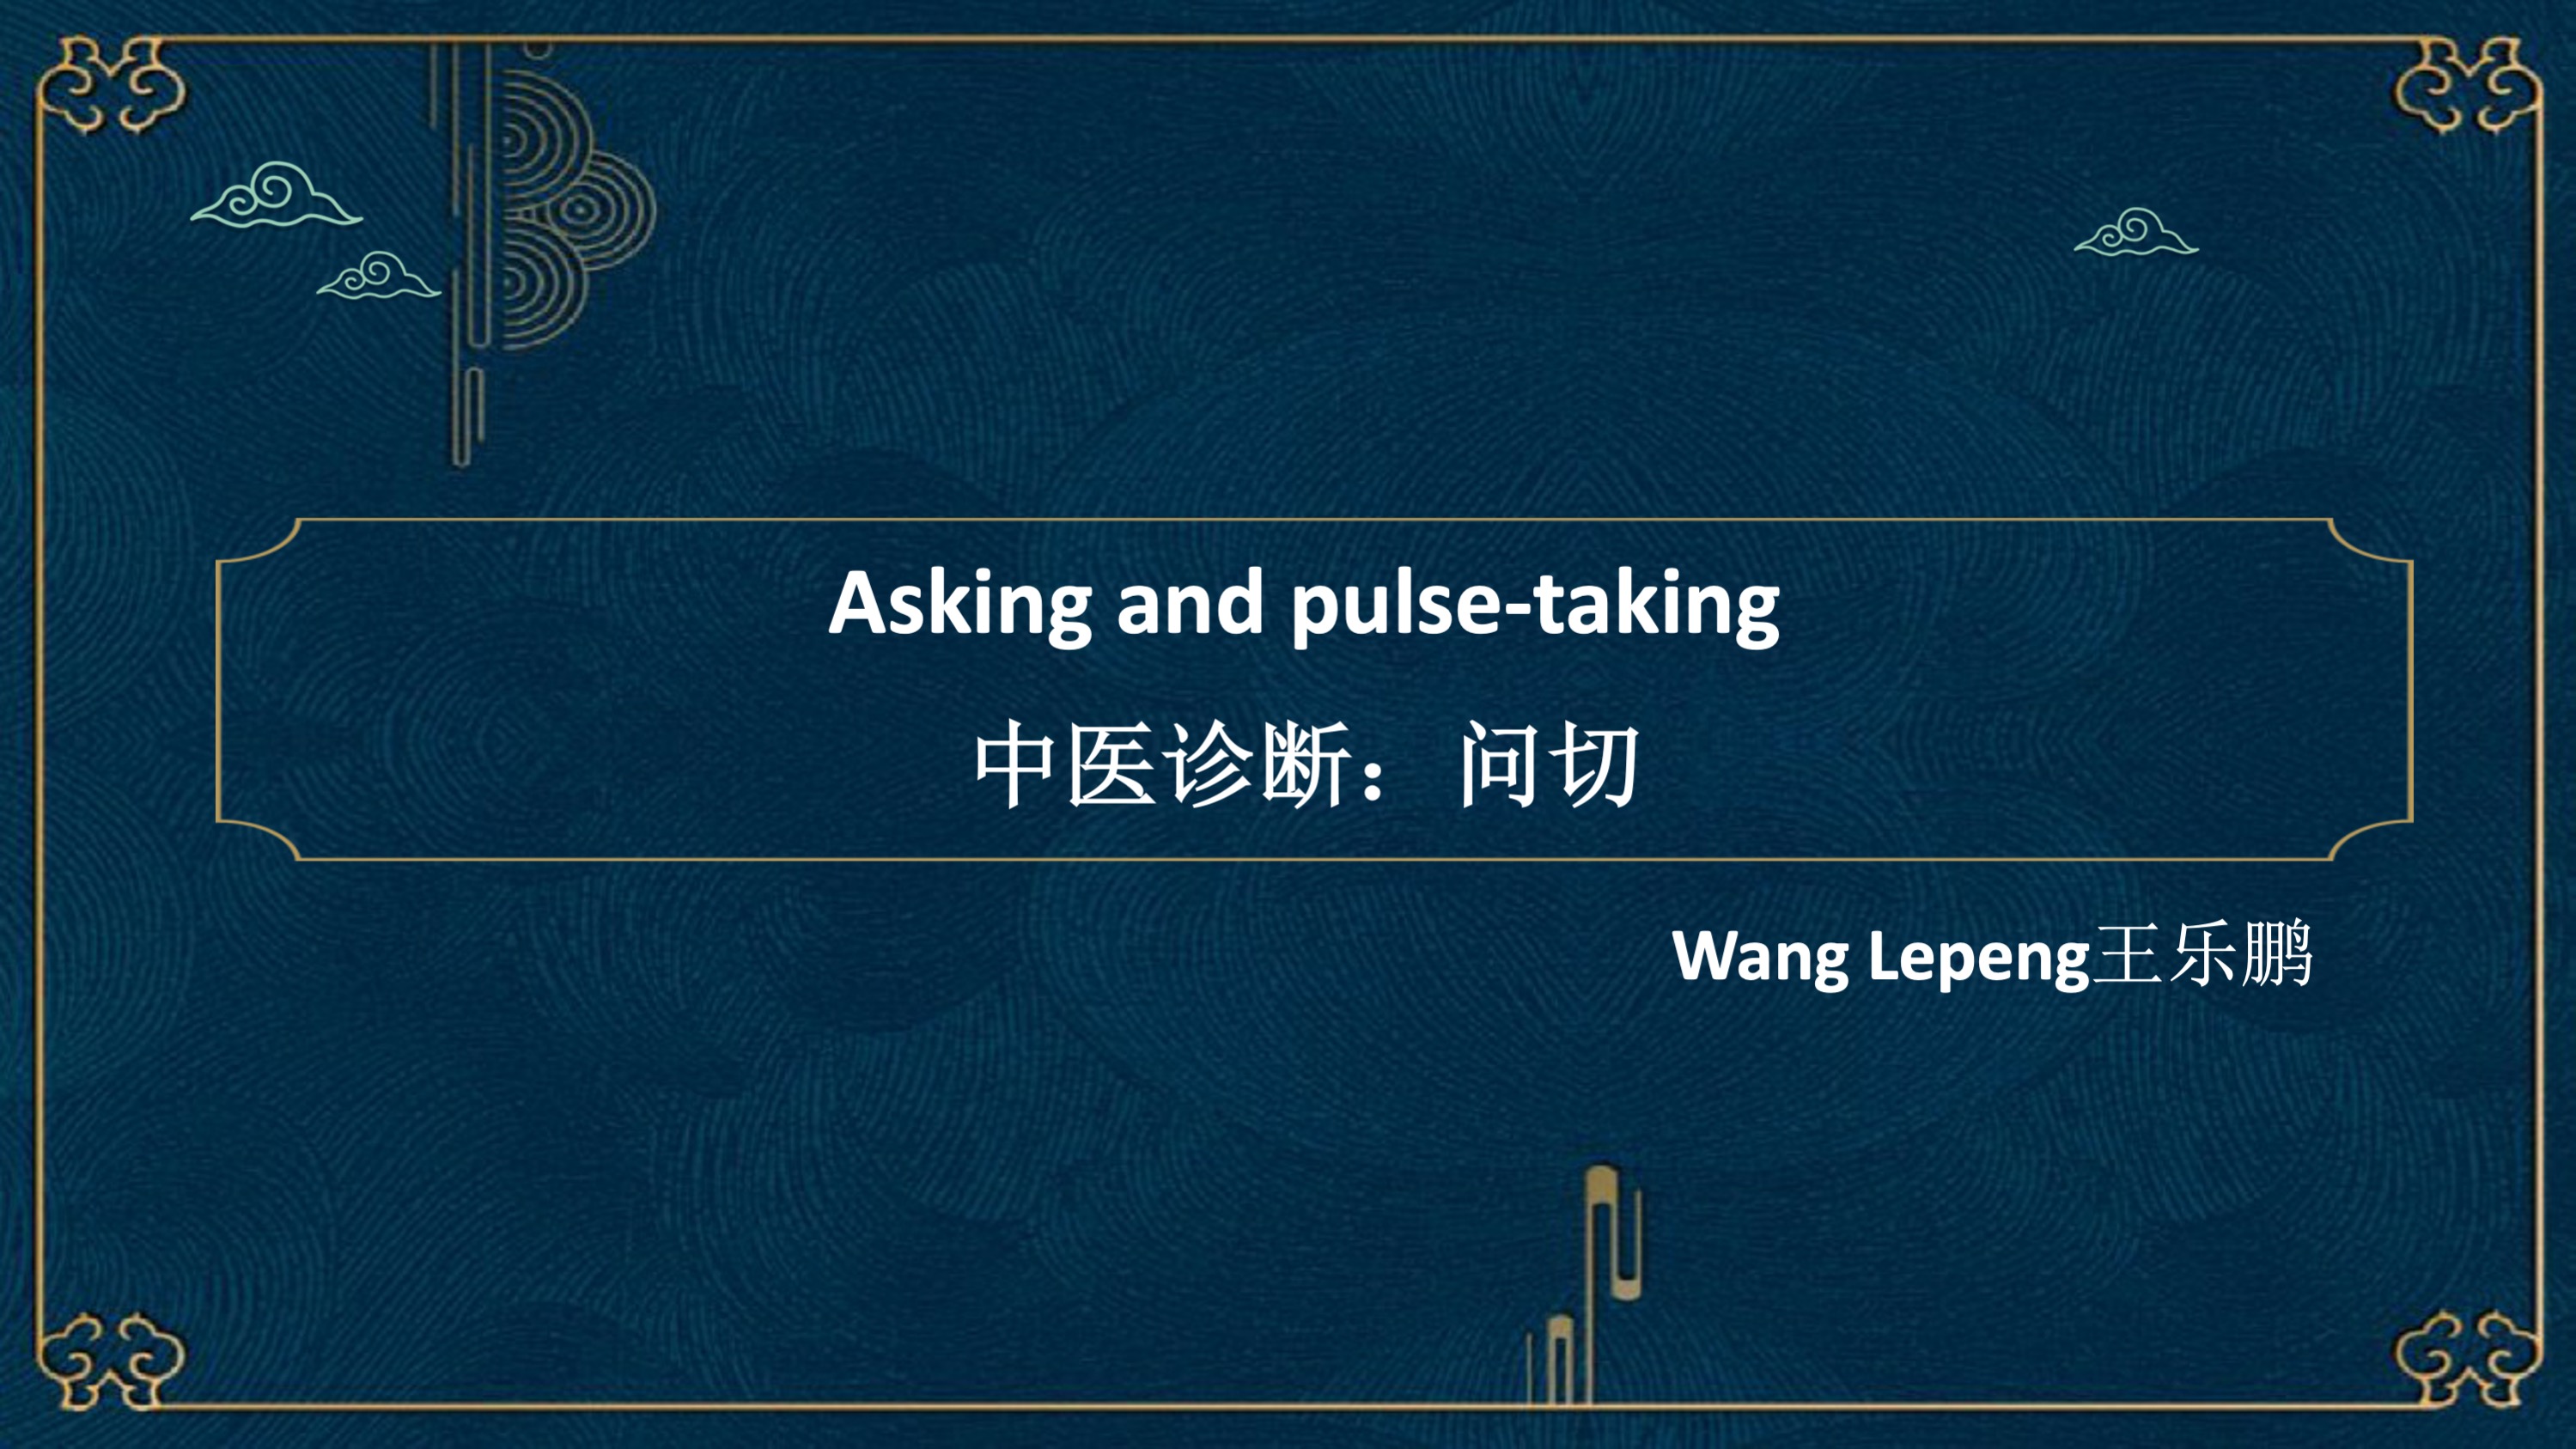 Asking and pulse-taking